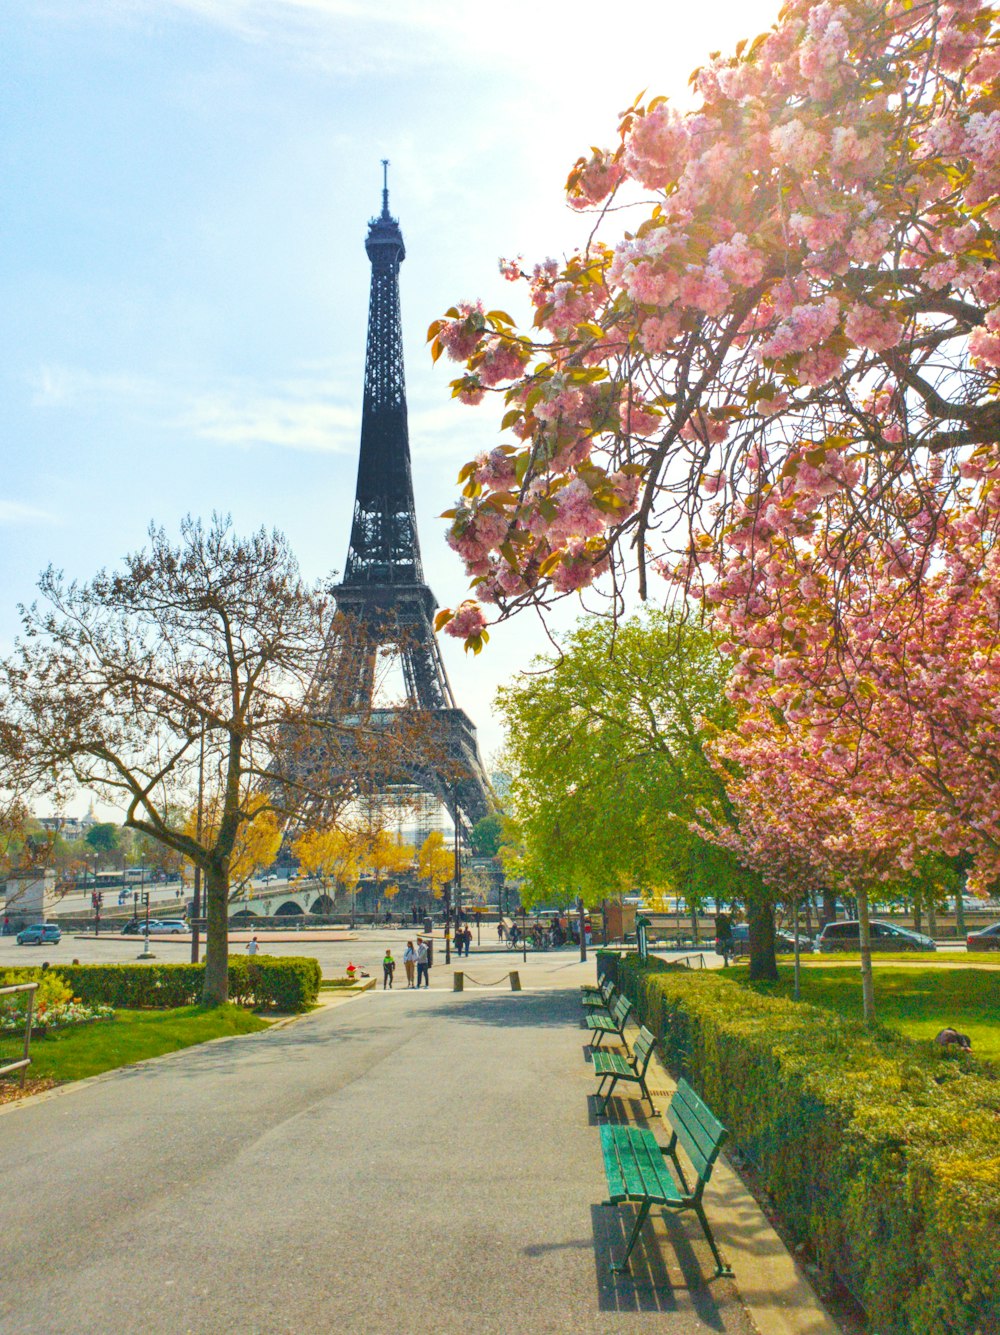 eiffel tower in paris france during daytime